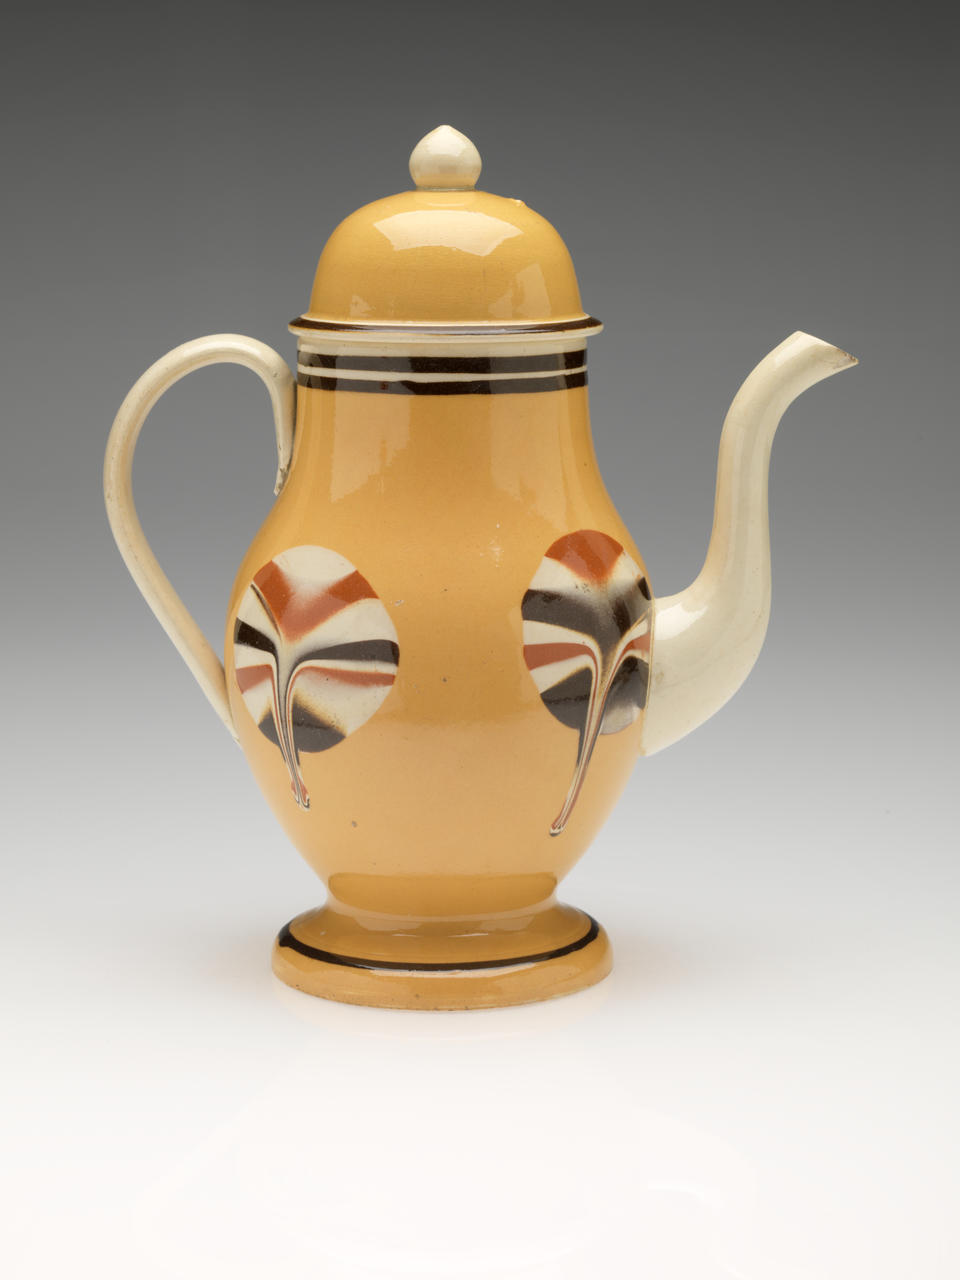 A teapot with a foot, spout, handle, and lid with a finial. The glaze is cream, orange, and brown, the body of the vessel has dripping symmetrically stripped glaze.